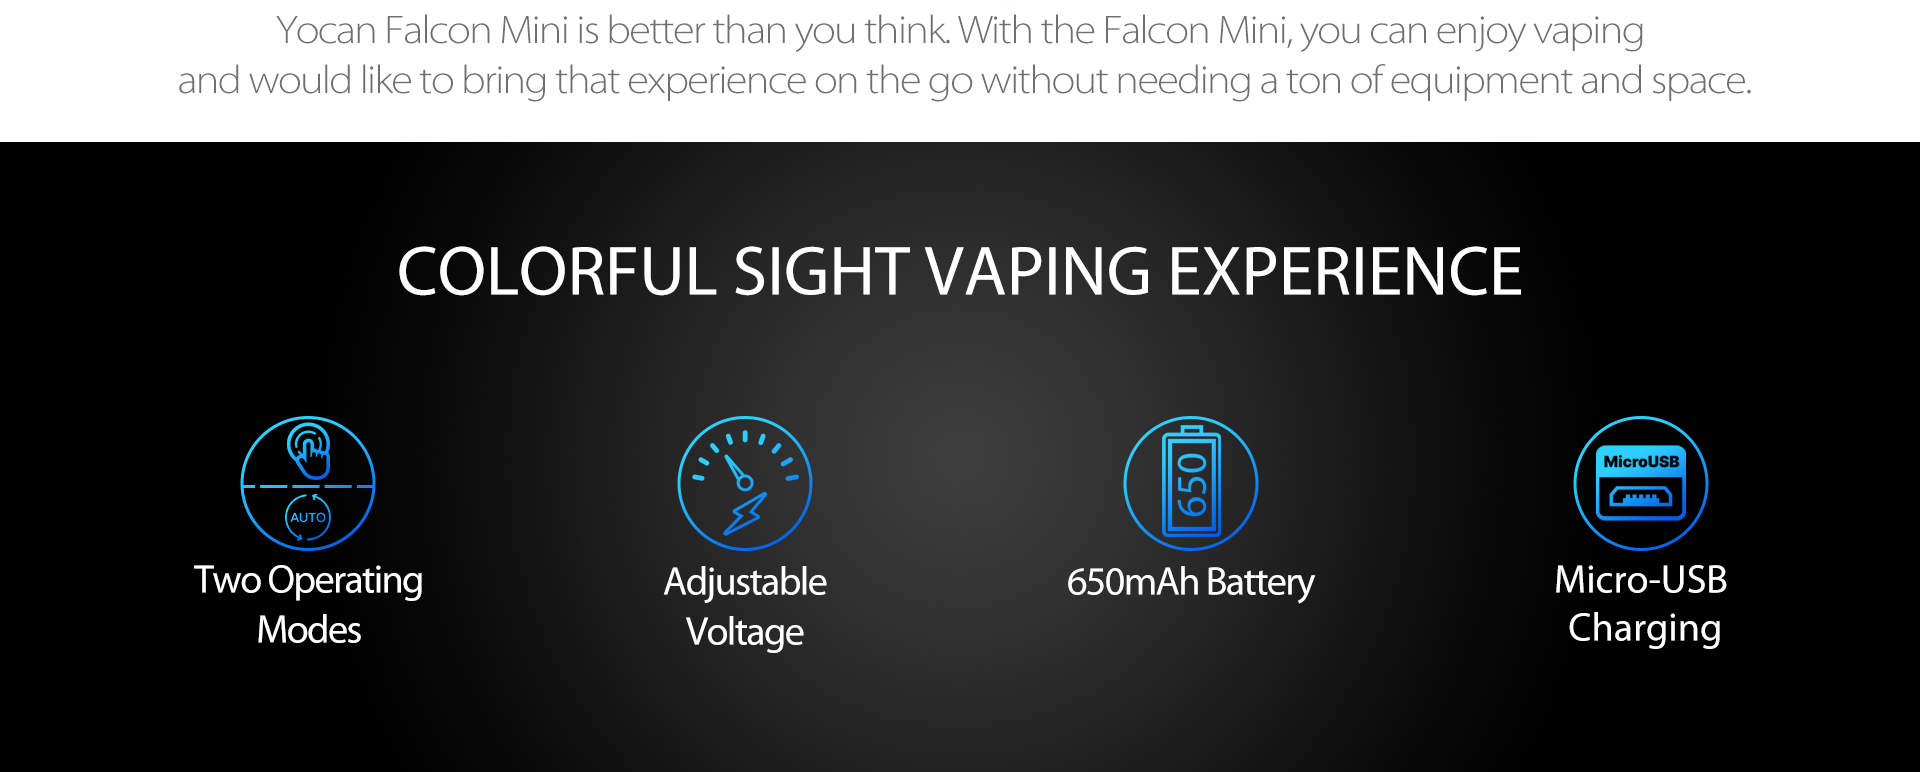 Yocan Falcon Mini Vaporizer Pen for your colorful sight vaping experience.